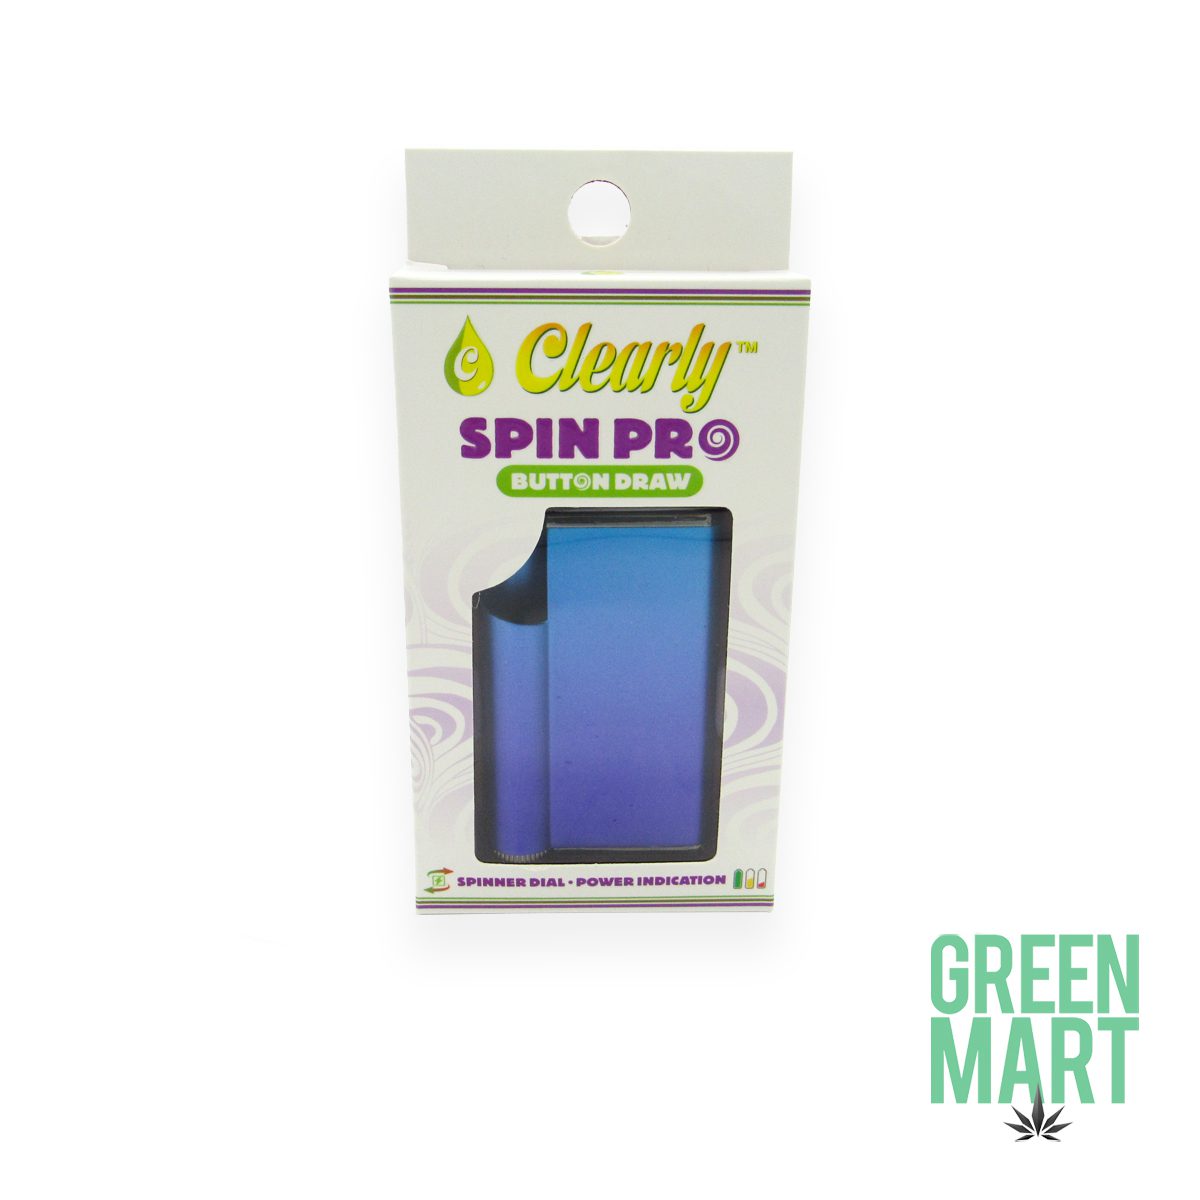 Clearly Spin Pro Battery